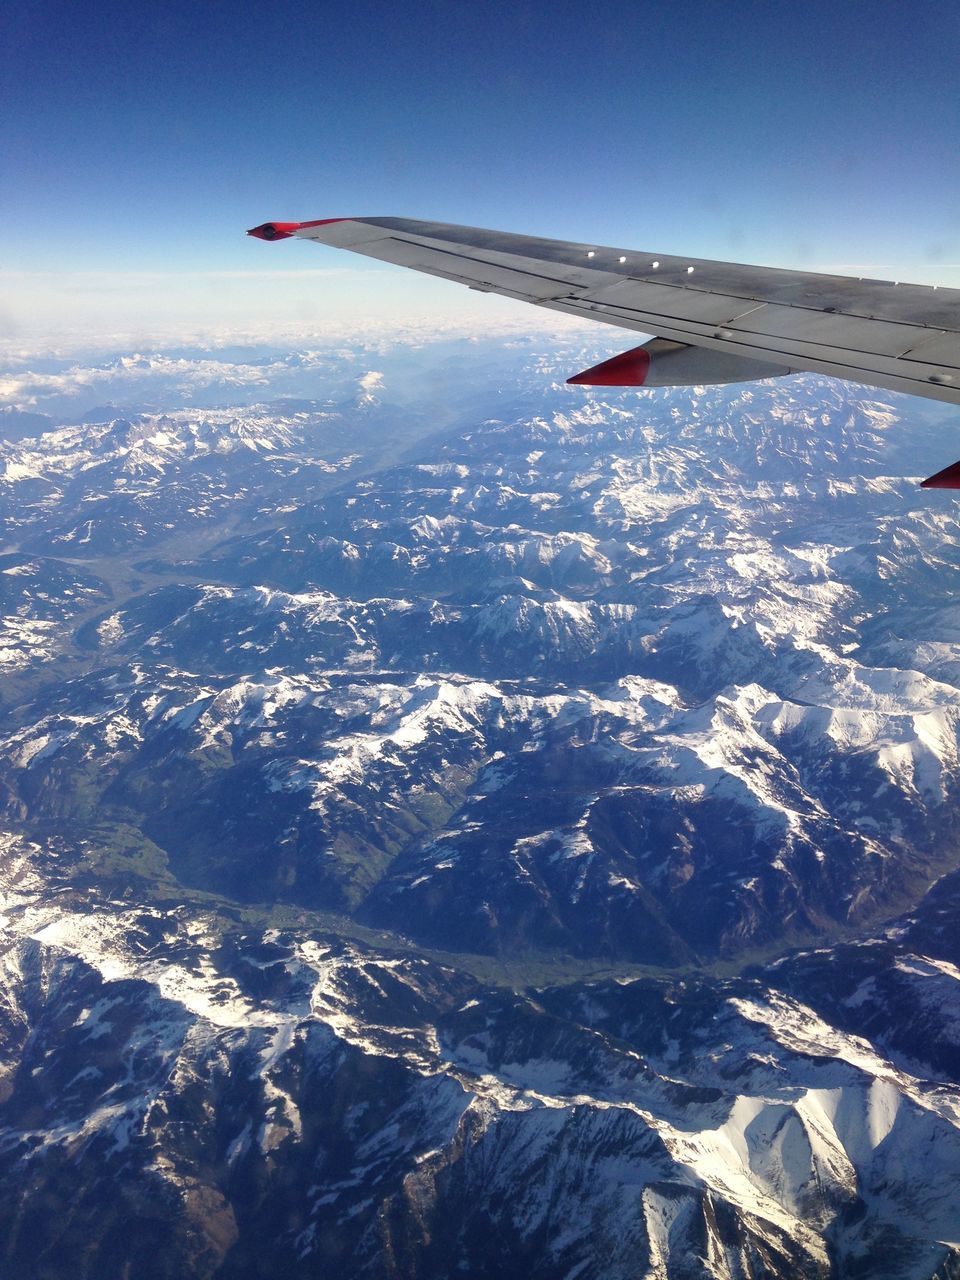 AERIAL VIEW OF AIRPLANE FLYING ABOVE SNOWCAPPED MOUNTAIN